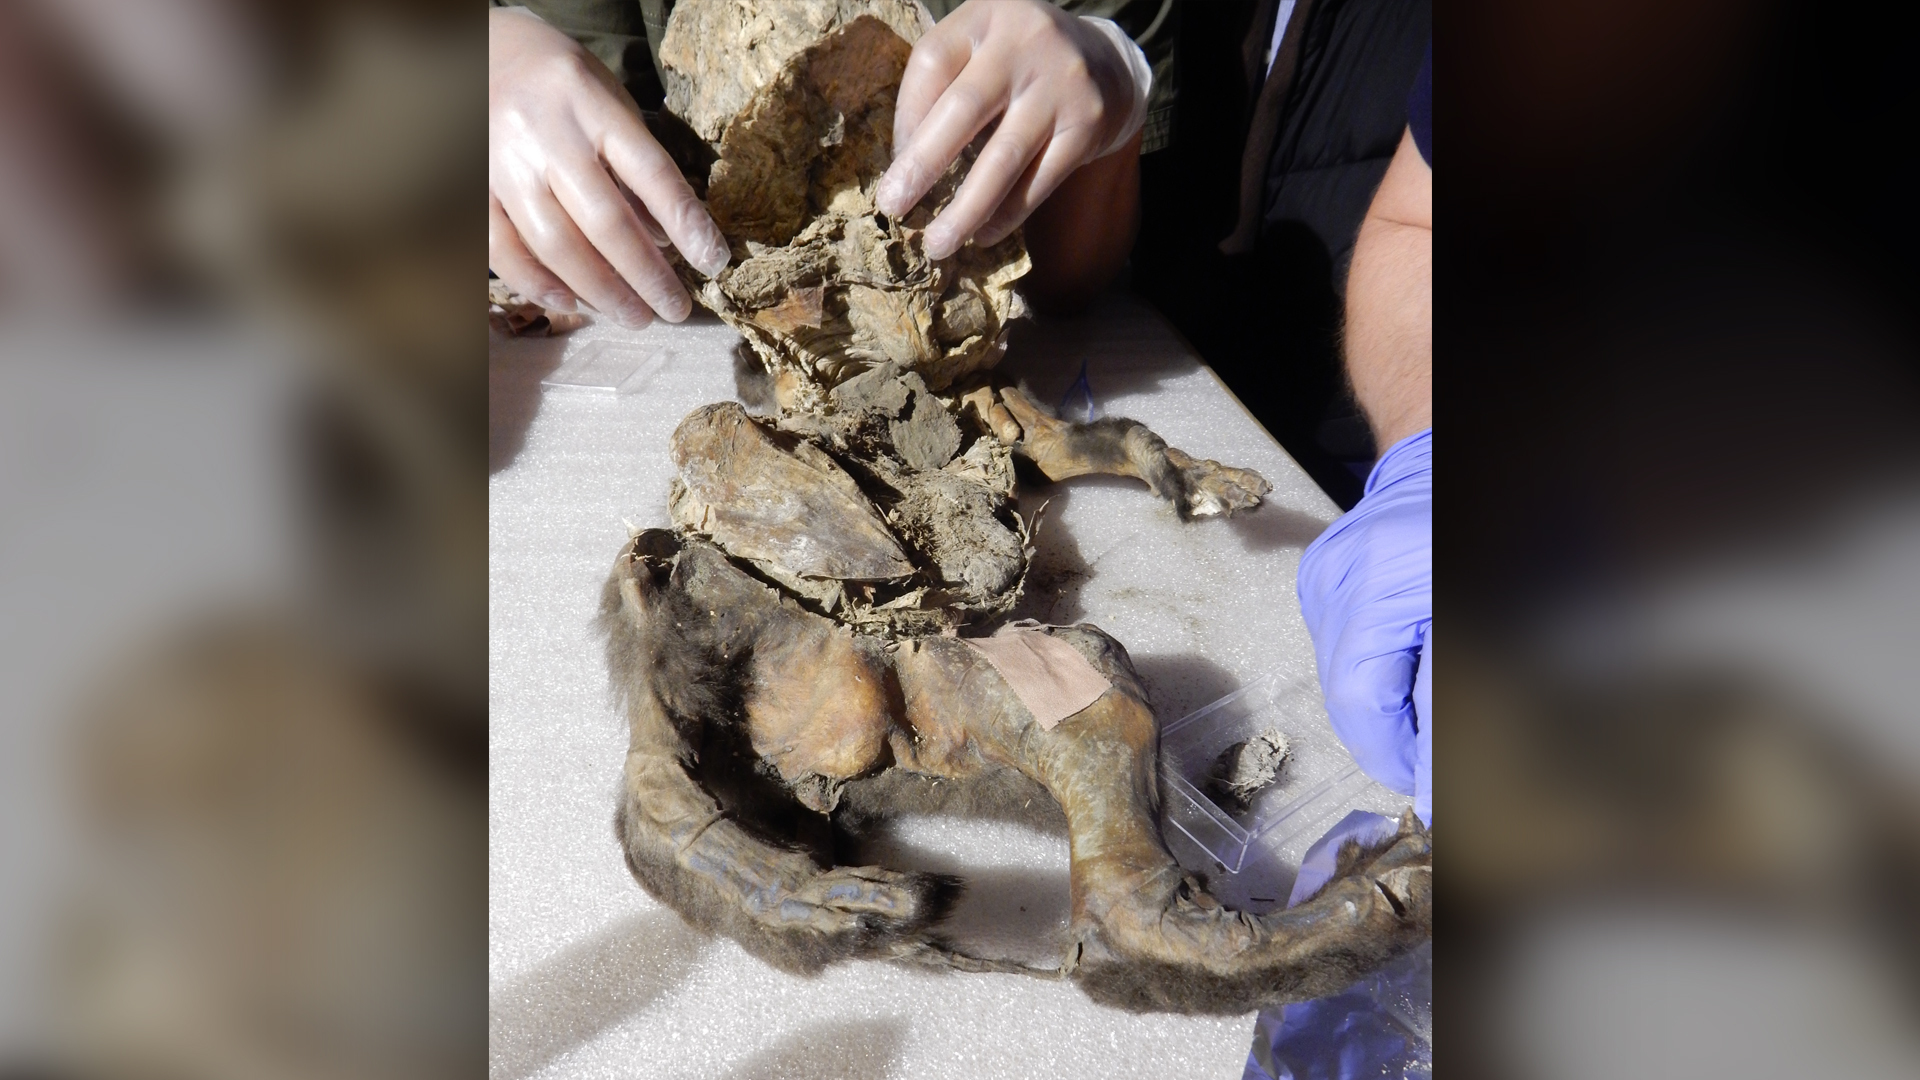 The roughly 14,000-year-old puppy mummy.